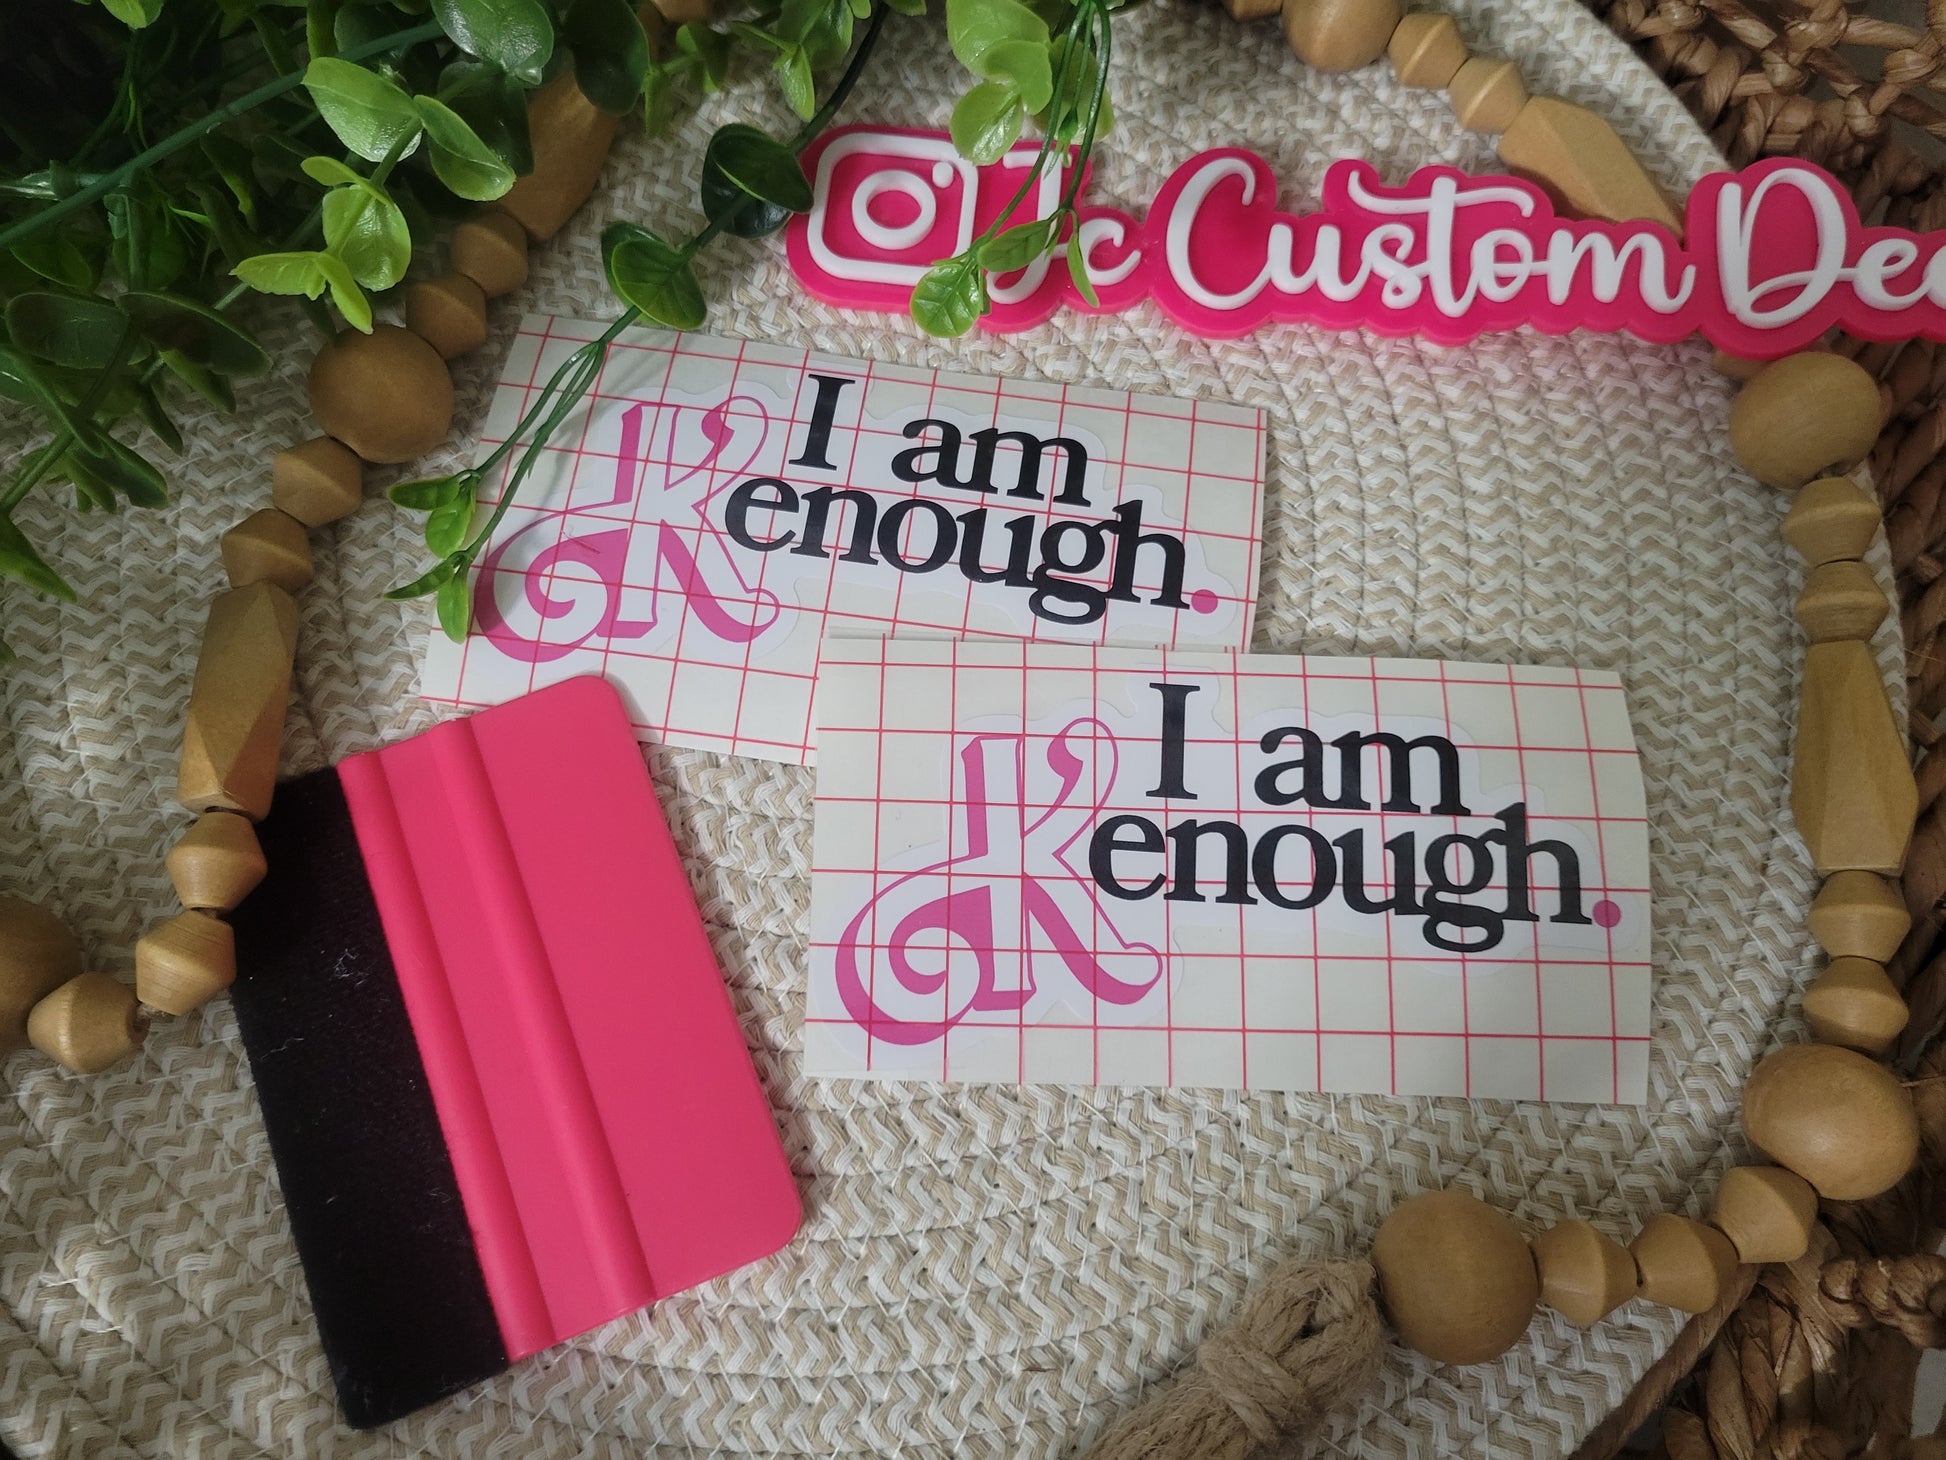 I Am Kenough Barbie-inspired Vinyl Decals for Tumblers and Resin